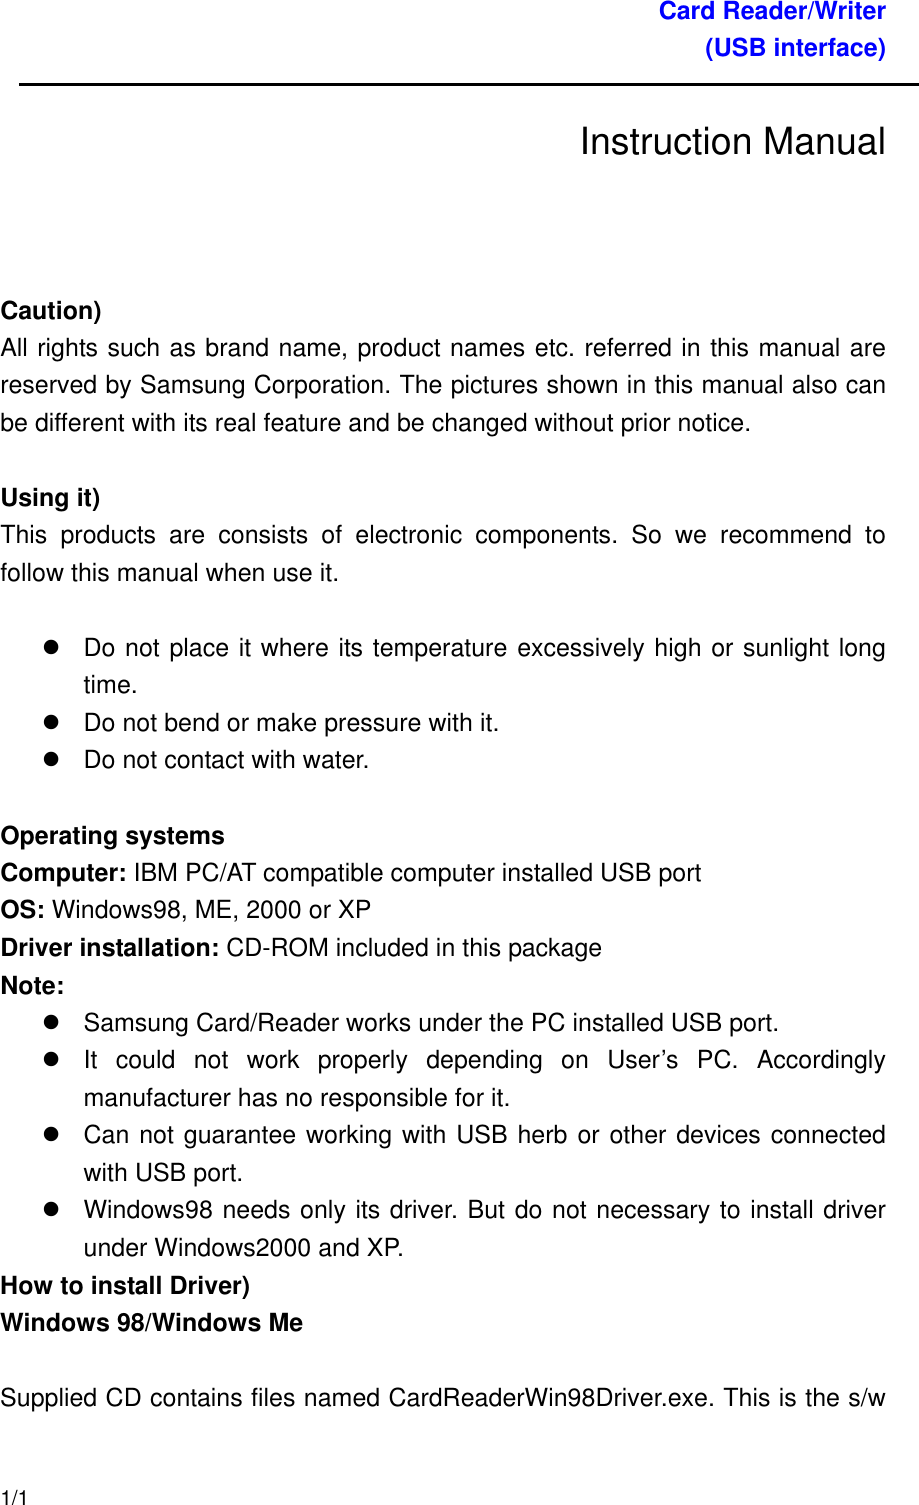 Card Reader/Writer (USB interface)   Instruction Manual       Caution) All rights such as brand name, product names etc. referred in this manual are reserved by Samsung Corporation. The pictures shown in this manual also can be different with its real feature and be changed without prior notice.   Using it) This products are consists of electronic components. So we recommend to follow this manual when use it.    Do not place it where its temperature excessively high or sunlight long time.  Do not bend or make pressure with it.  Do not contact with water.   Operating systems Computer: IBM PC/AT compatible computer installed USB port OS: Windows98, ME, 2000 or XP   Driver installation: CD-ROM included in this package Note:  Samsung Card/Reader works under the PC installed USB port.  It could not work properly depending on User’s PC. Accordingly manufacturer has no responsible for it.  Can not guarantee working with USB herb or other devices connected with USB port.    Windows98 needs only its driver. But do not necessary to install driver under Windows2000 and XP. How to install Driver) Windows 98/Windows Me     Supplied CD contains files named CardReaderWin98Driver.exe. This is the s/w 1/1 